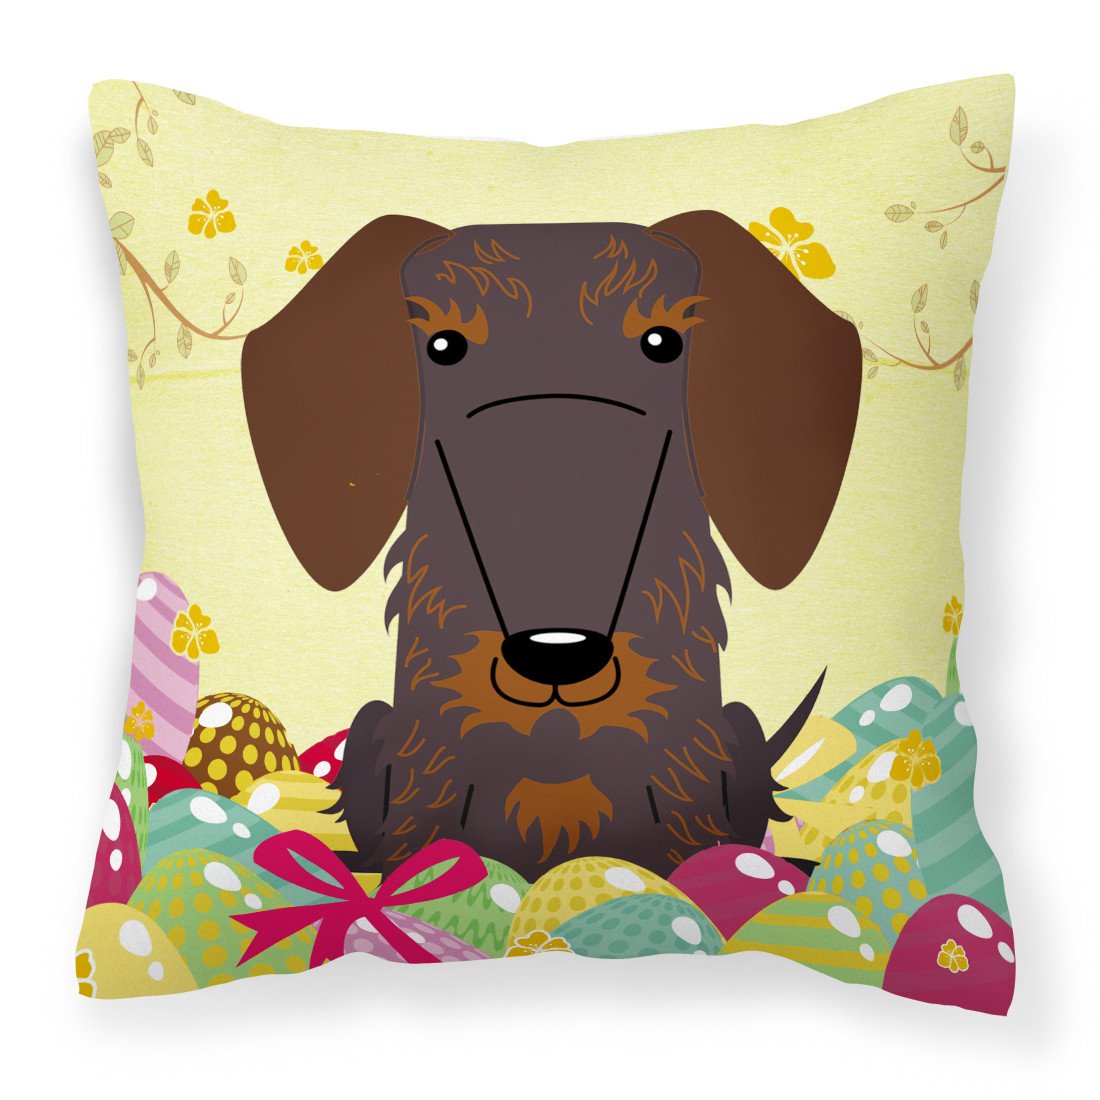 Easter Eggs Wire Haired Dachshund Chocolate Fabric Decorative Pillow BB6129PW1818 by Caroline's Treasures